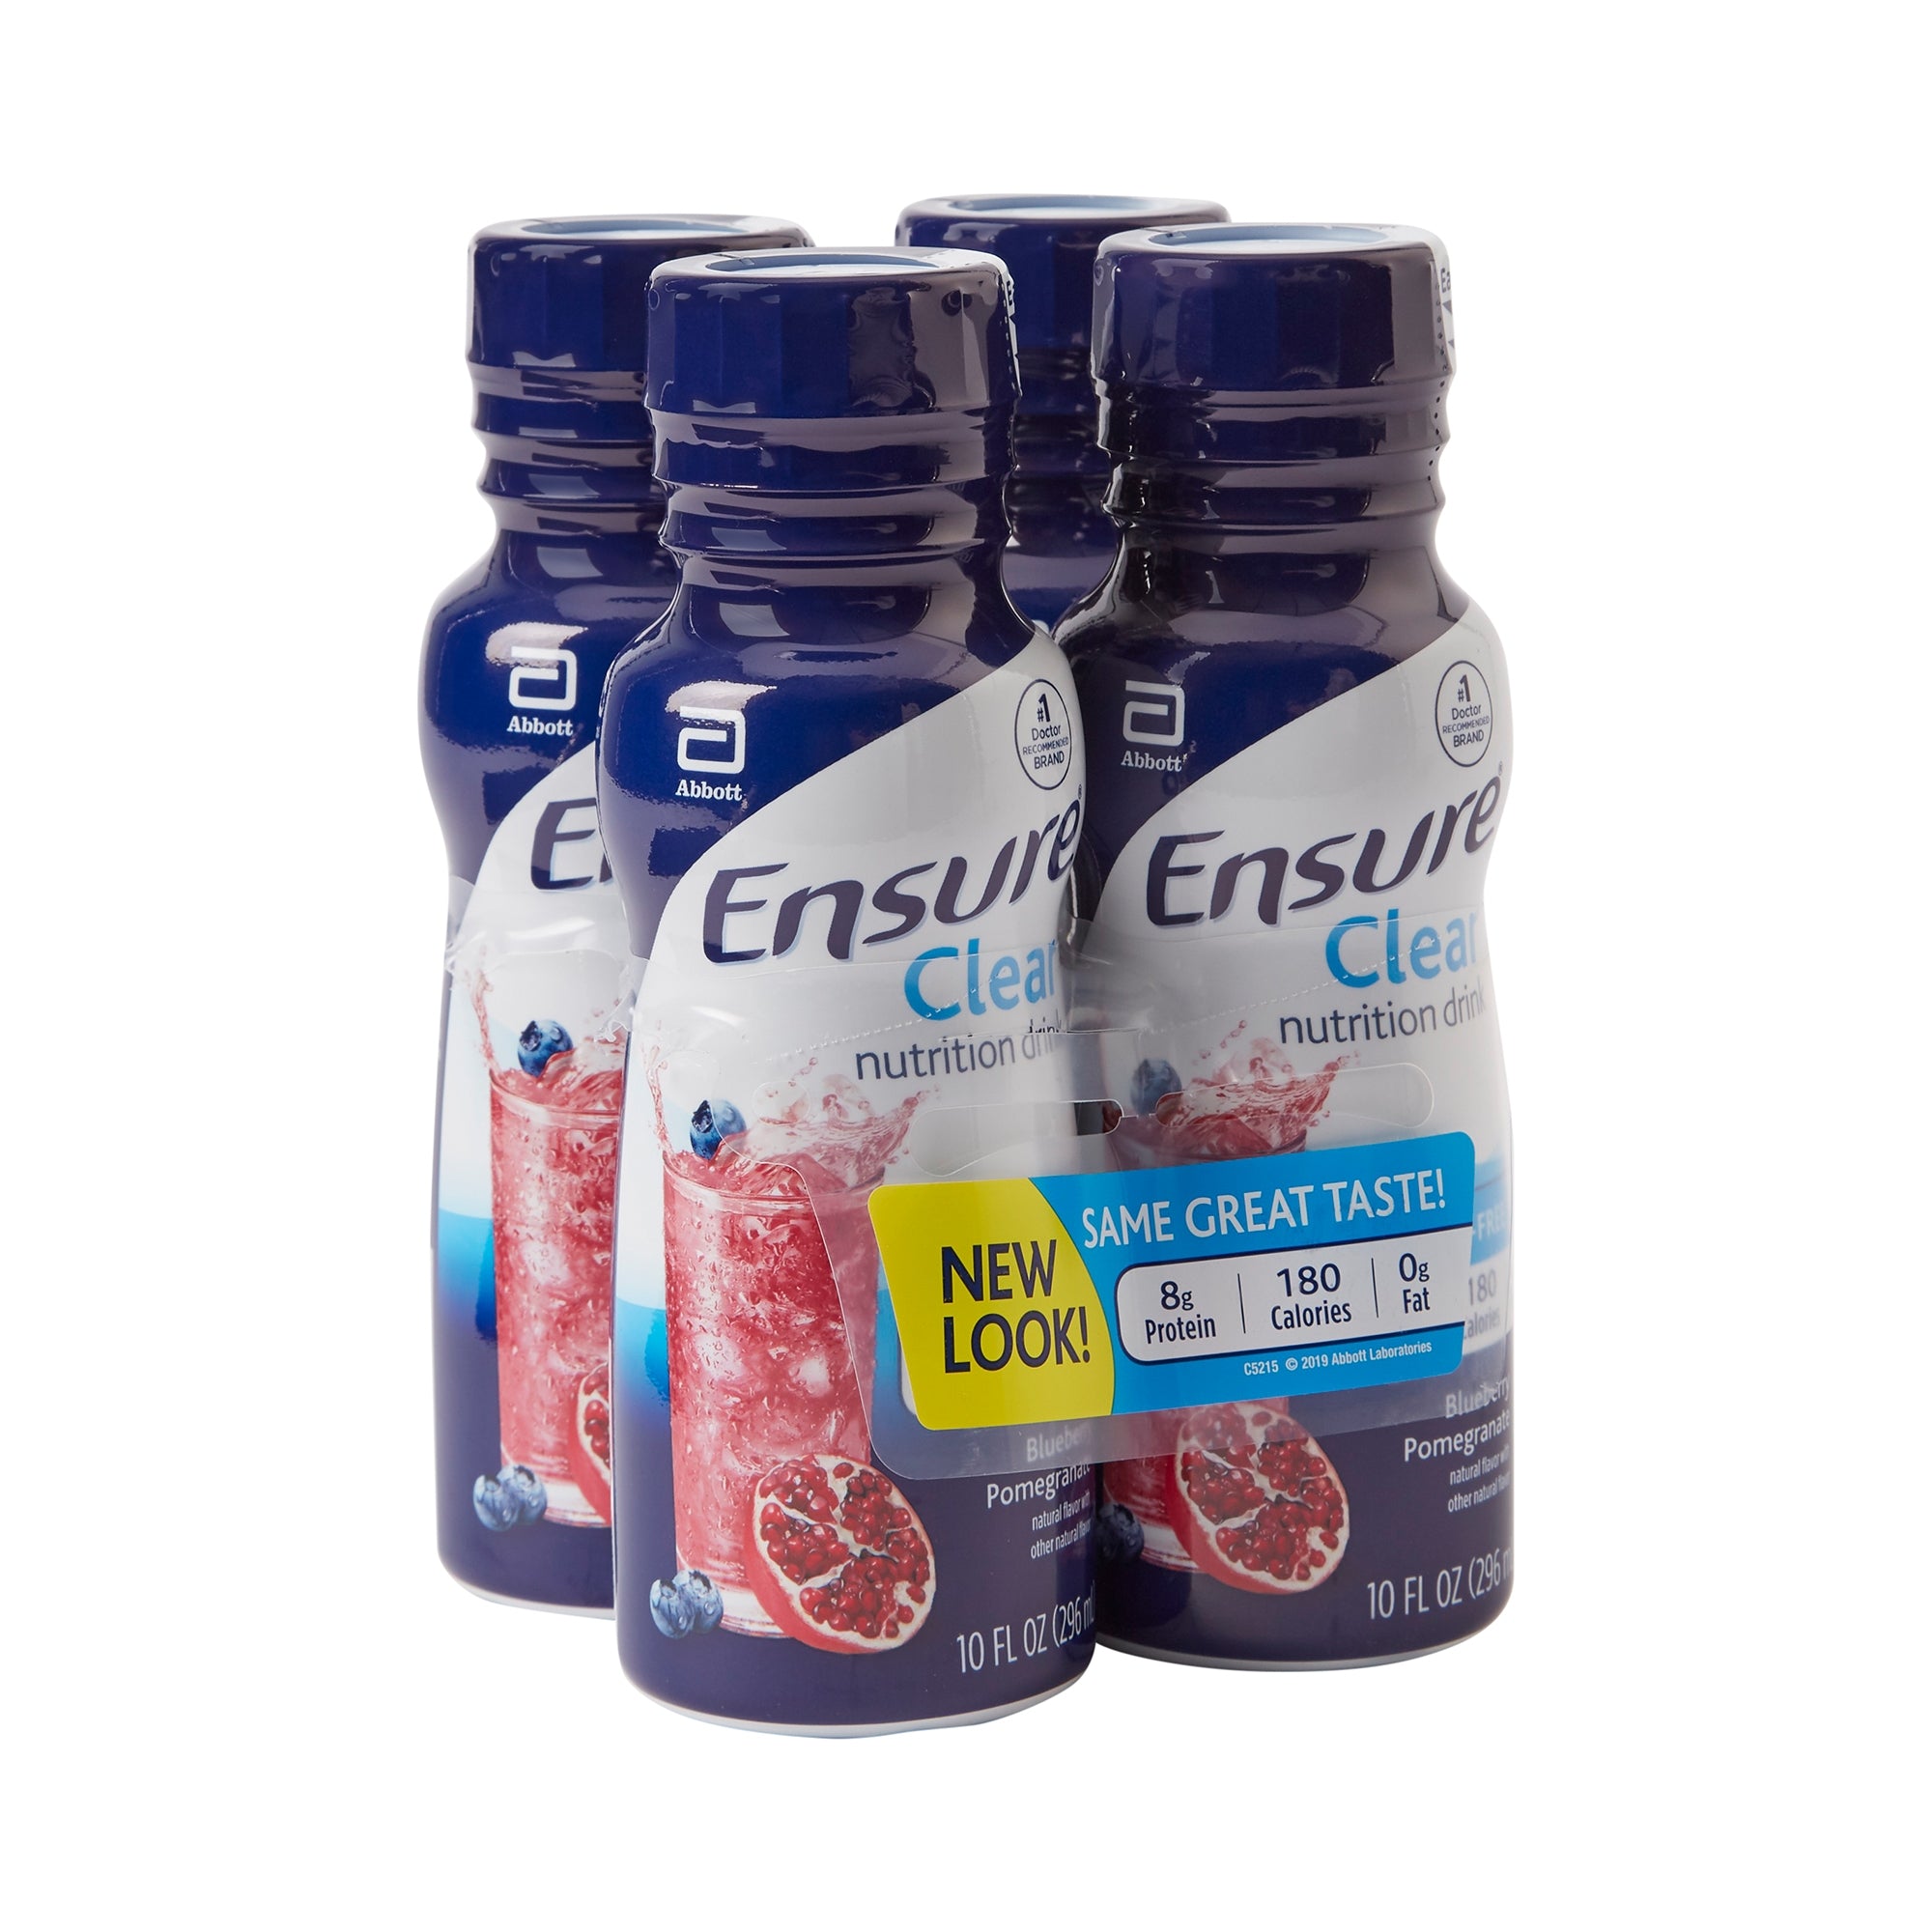 Ensure® Clear Blueberry Pomegranate Nutrition Drink, 10oz - Health Supplement